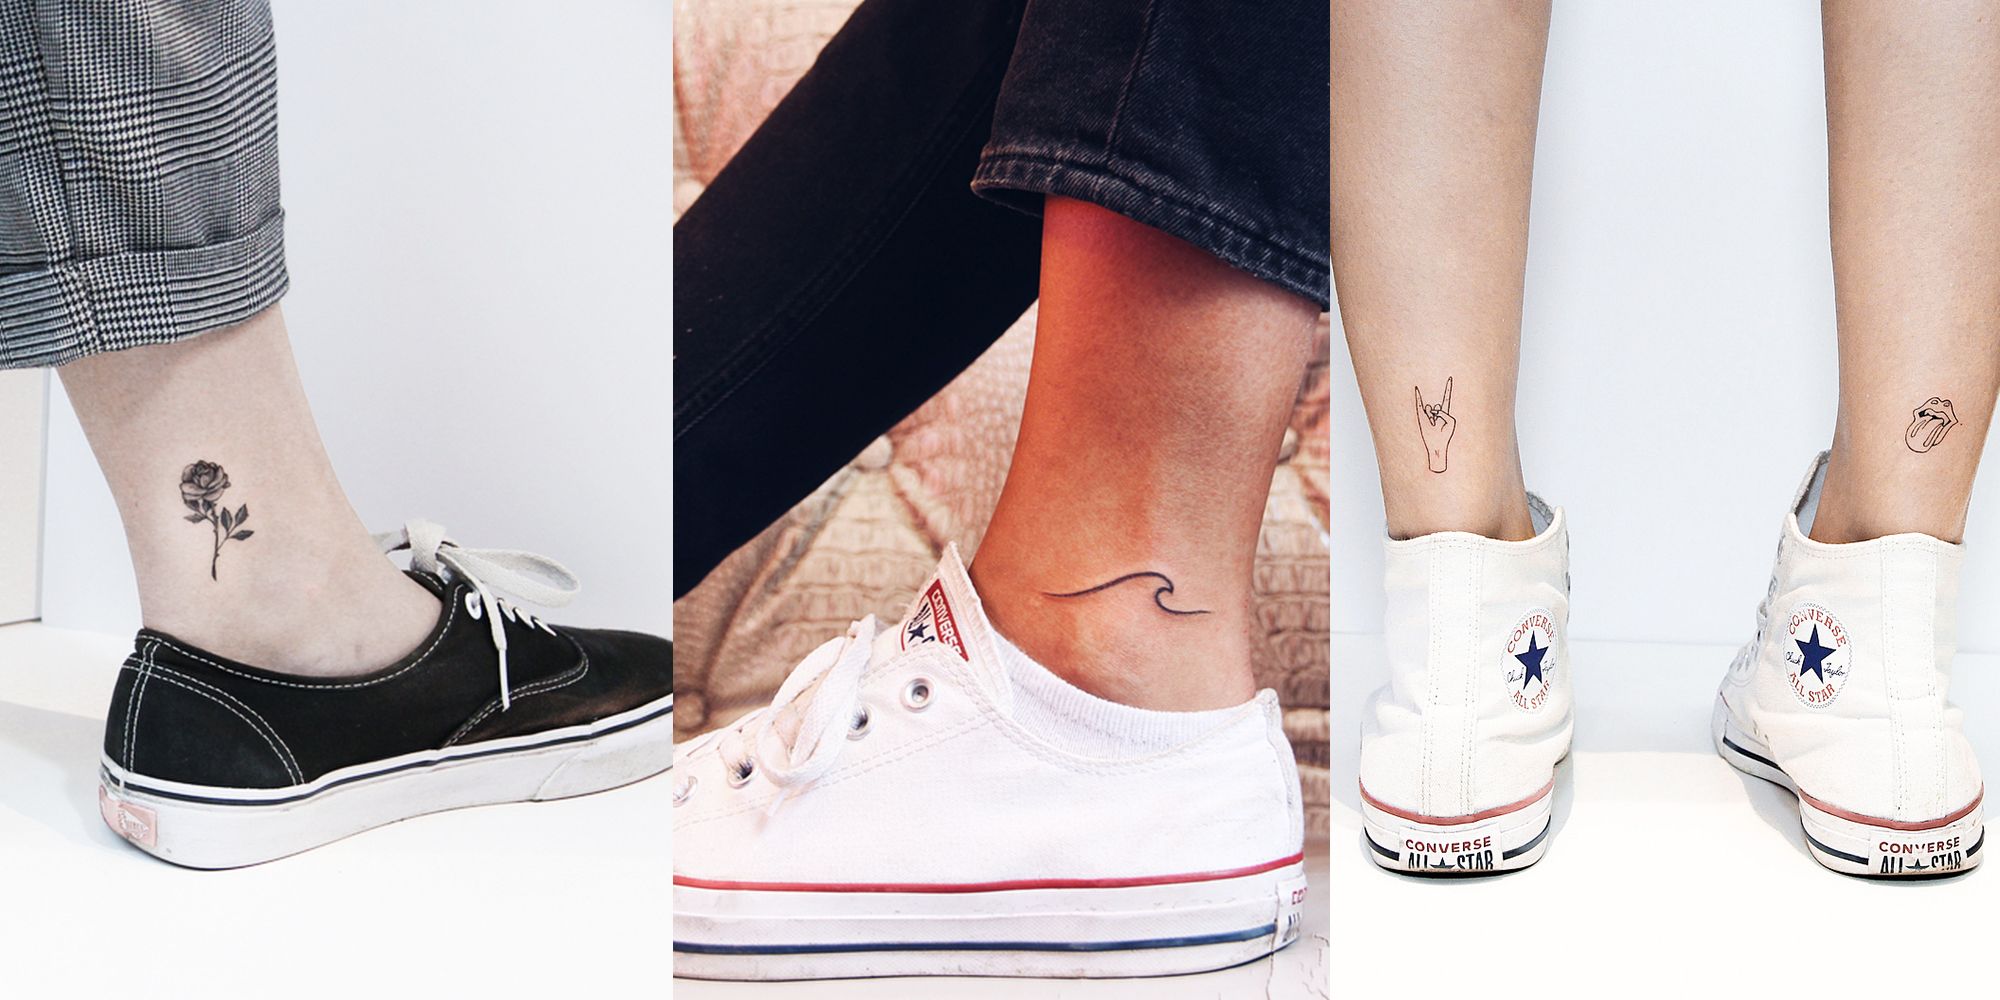 The 10 Best Ankle Tattoos Ideas  Designs